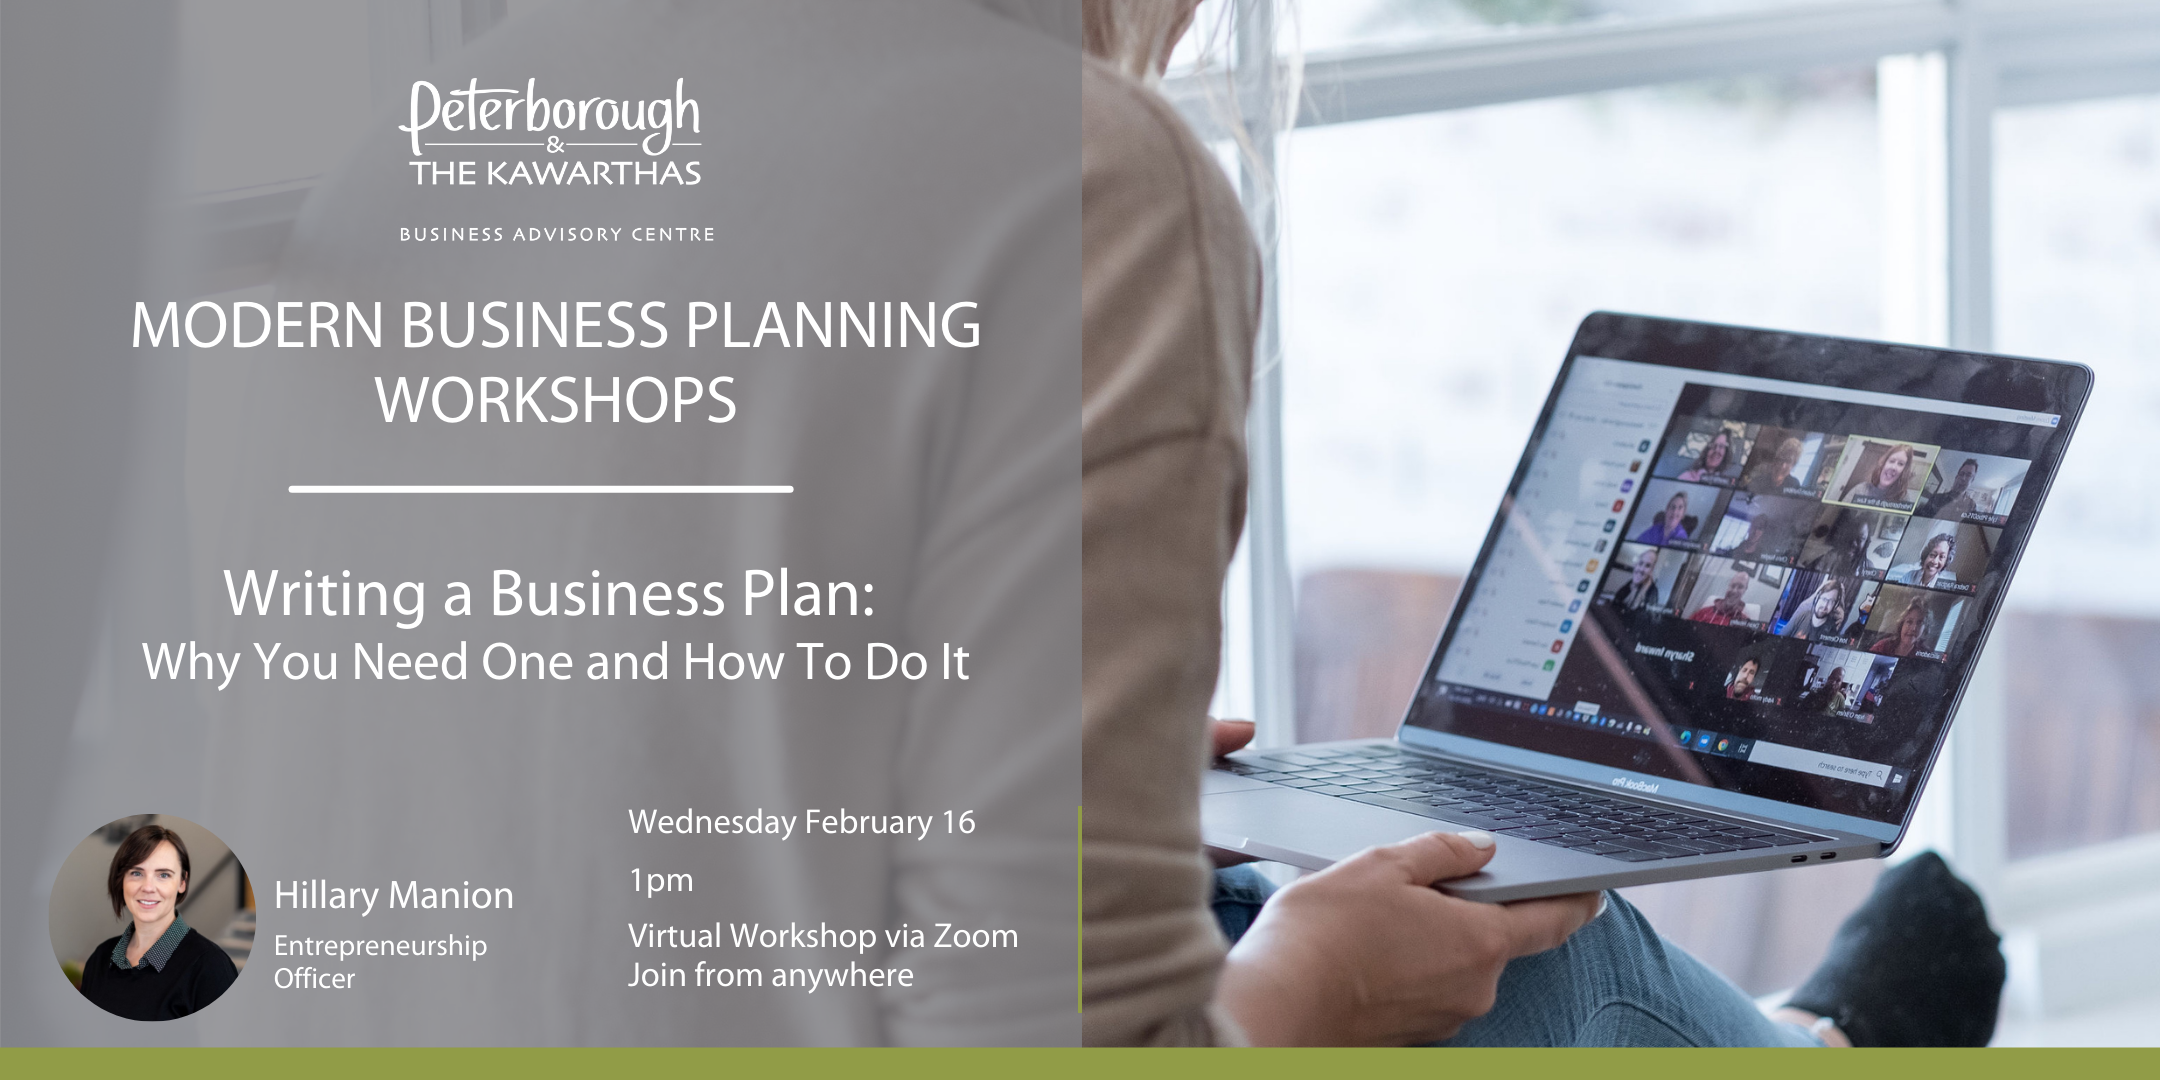 Modern Business Planning Workshops Writing a Business Plan: Why You Need One and How to Do It